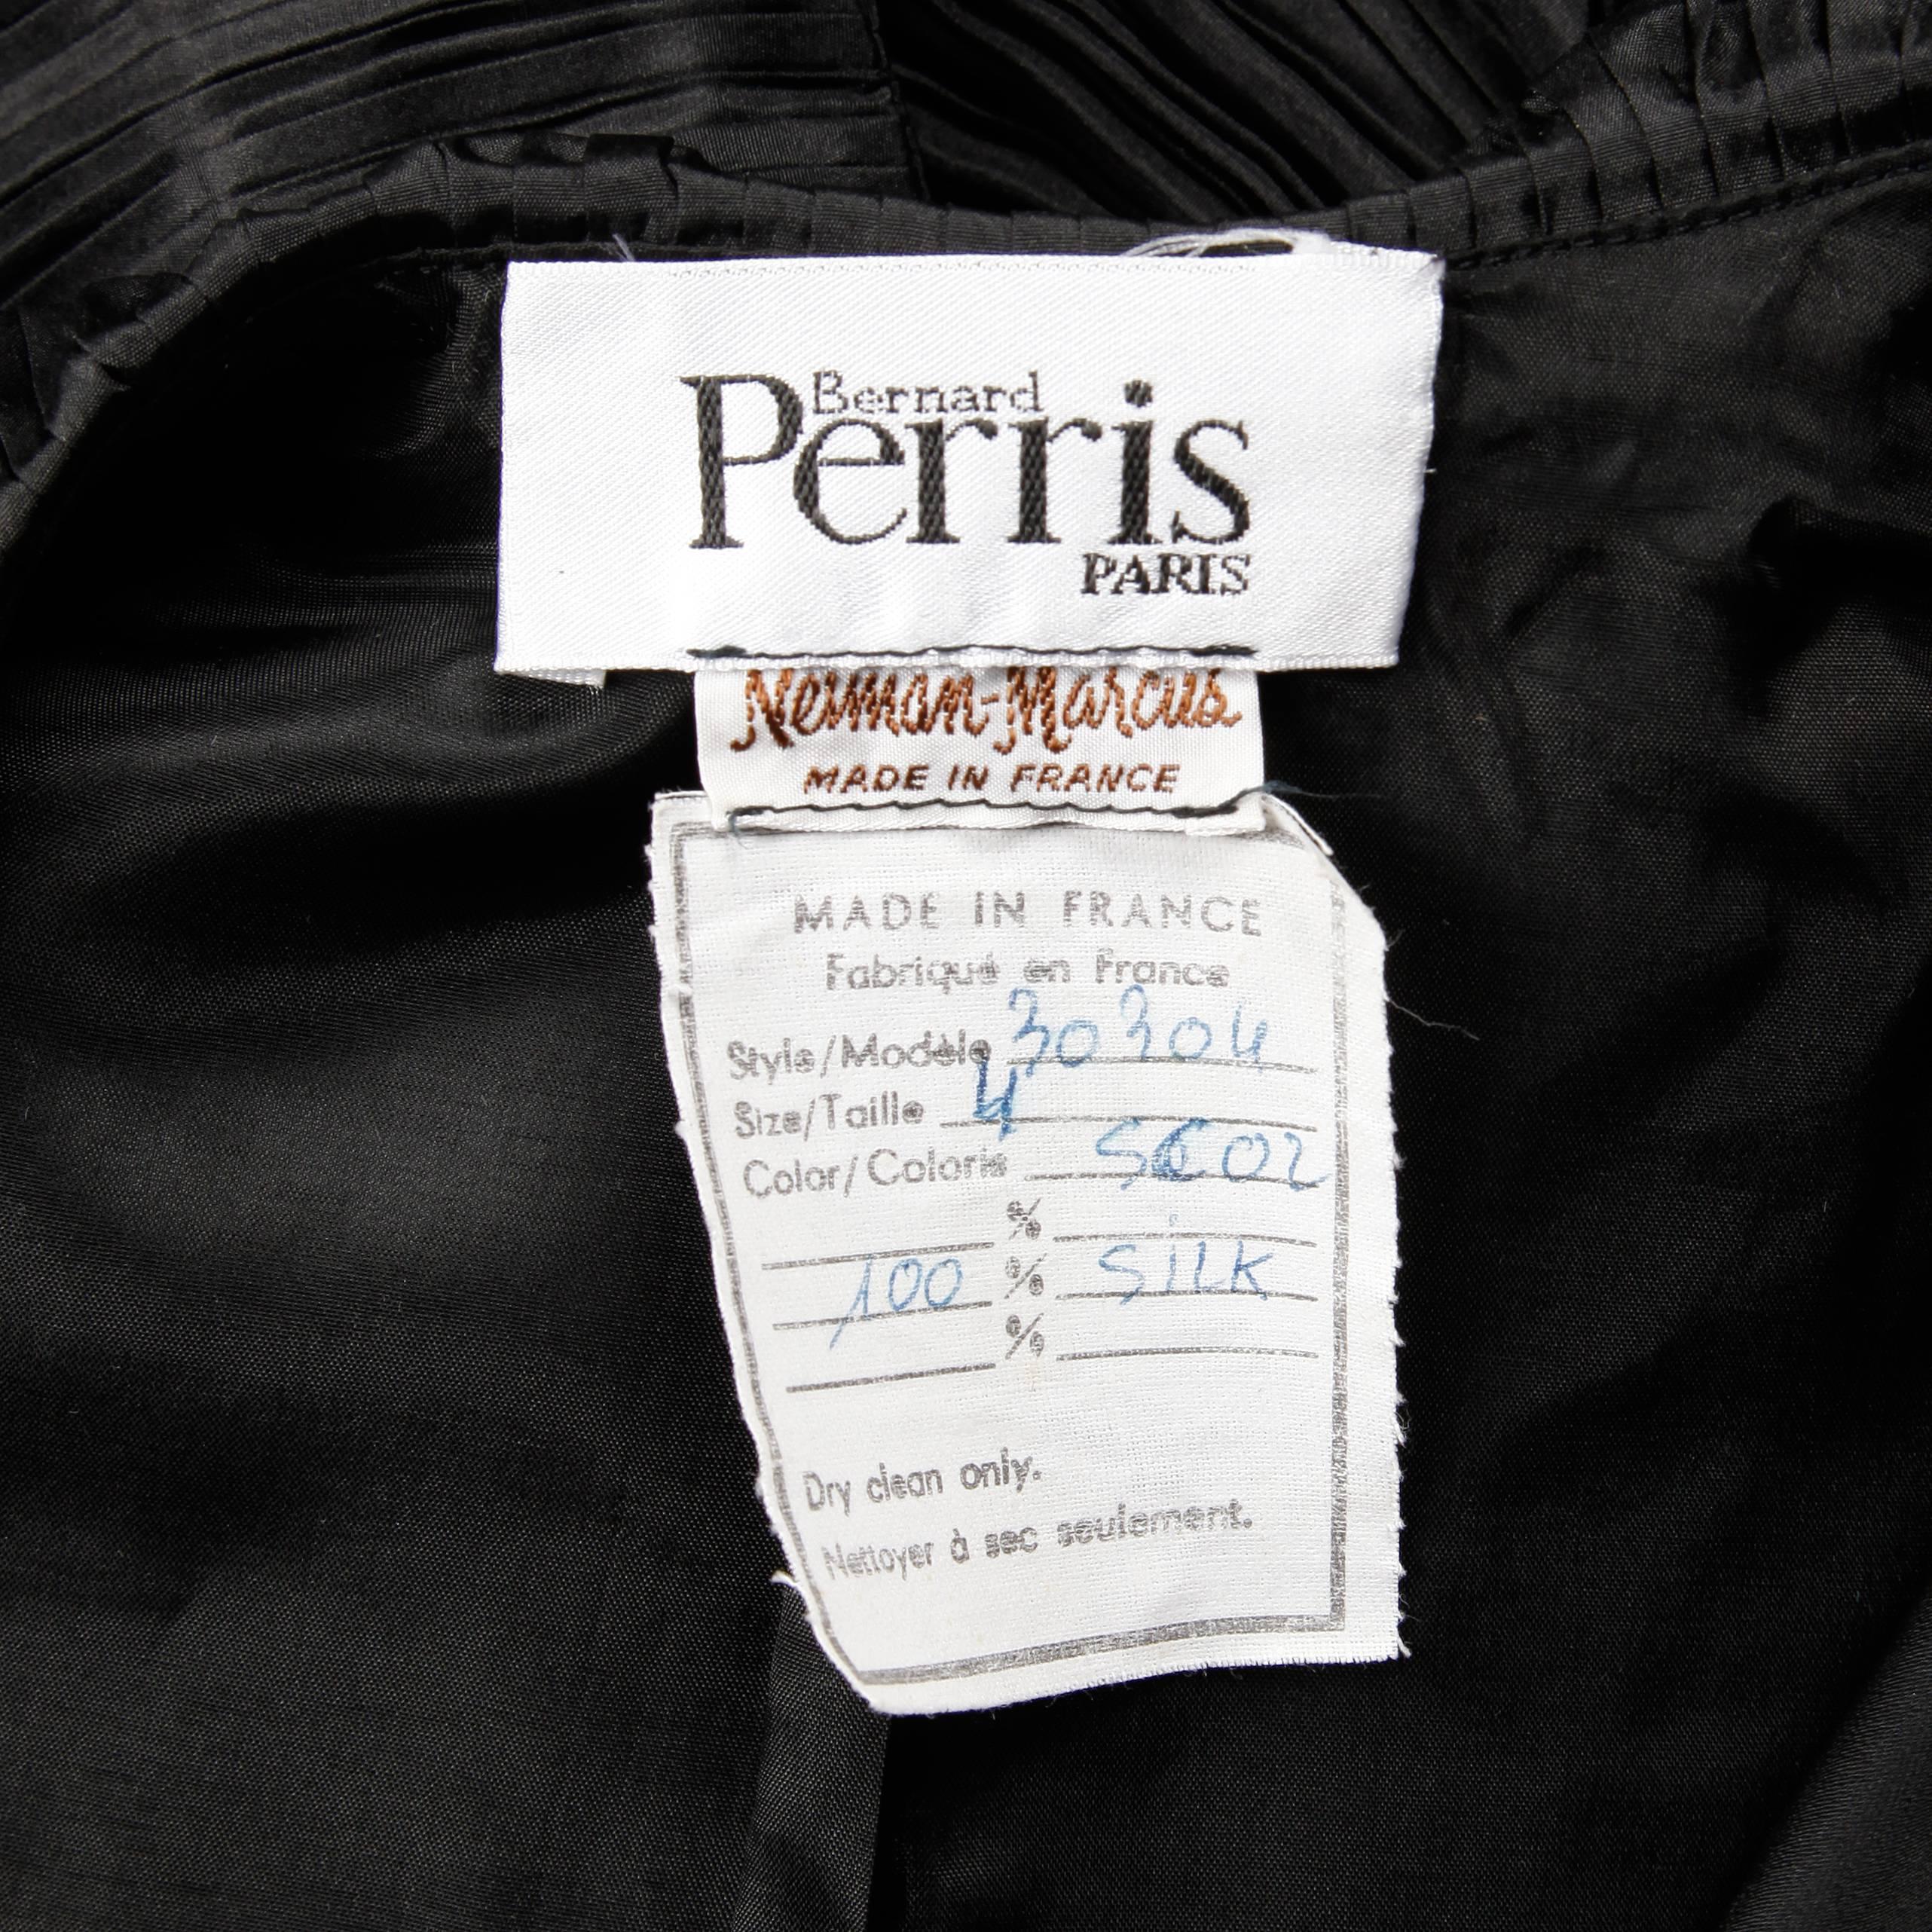 Truly unique vintage pleated silk black tuxedo jacket by Bernard Perris with amazing construction! Fully lined with front button closure. 100% silk. The marked size is 4, and the jacket fits like an XS. The bust measures 33